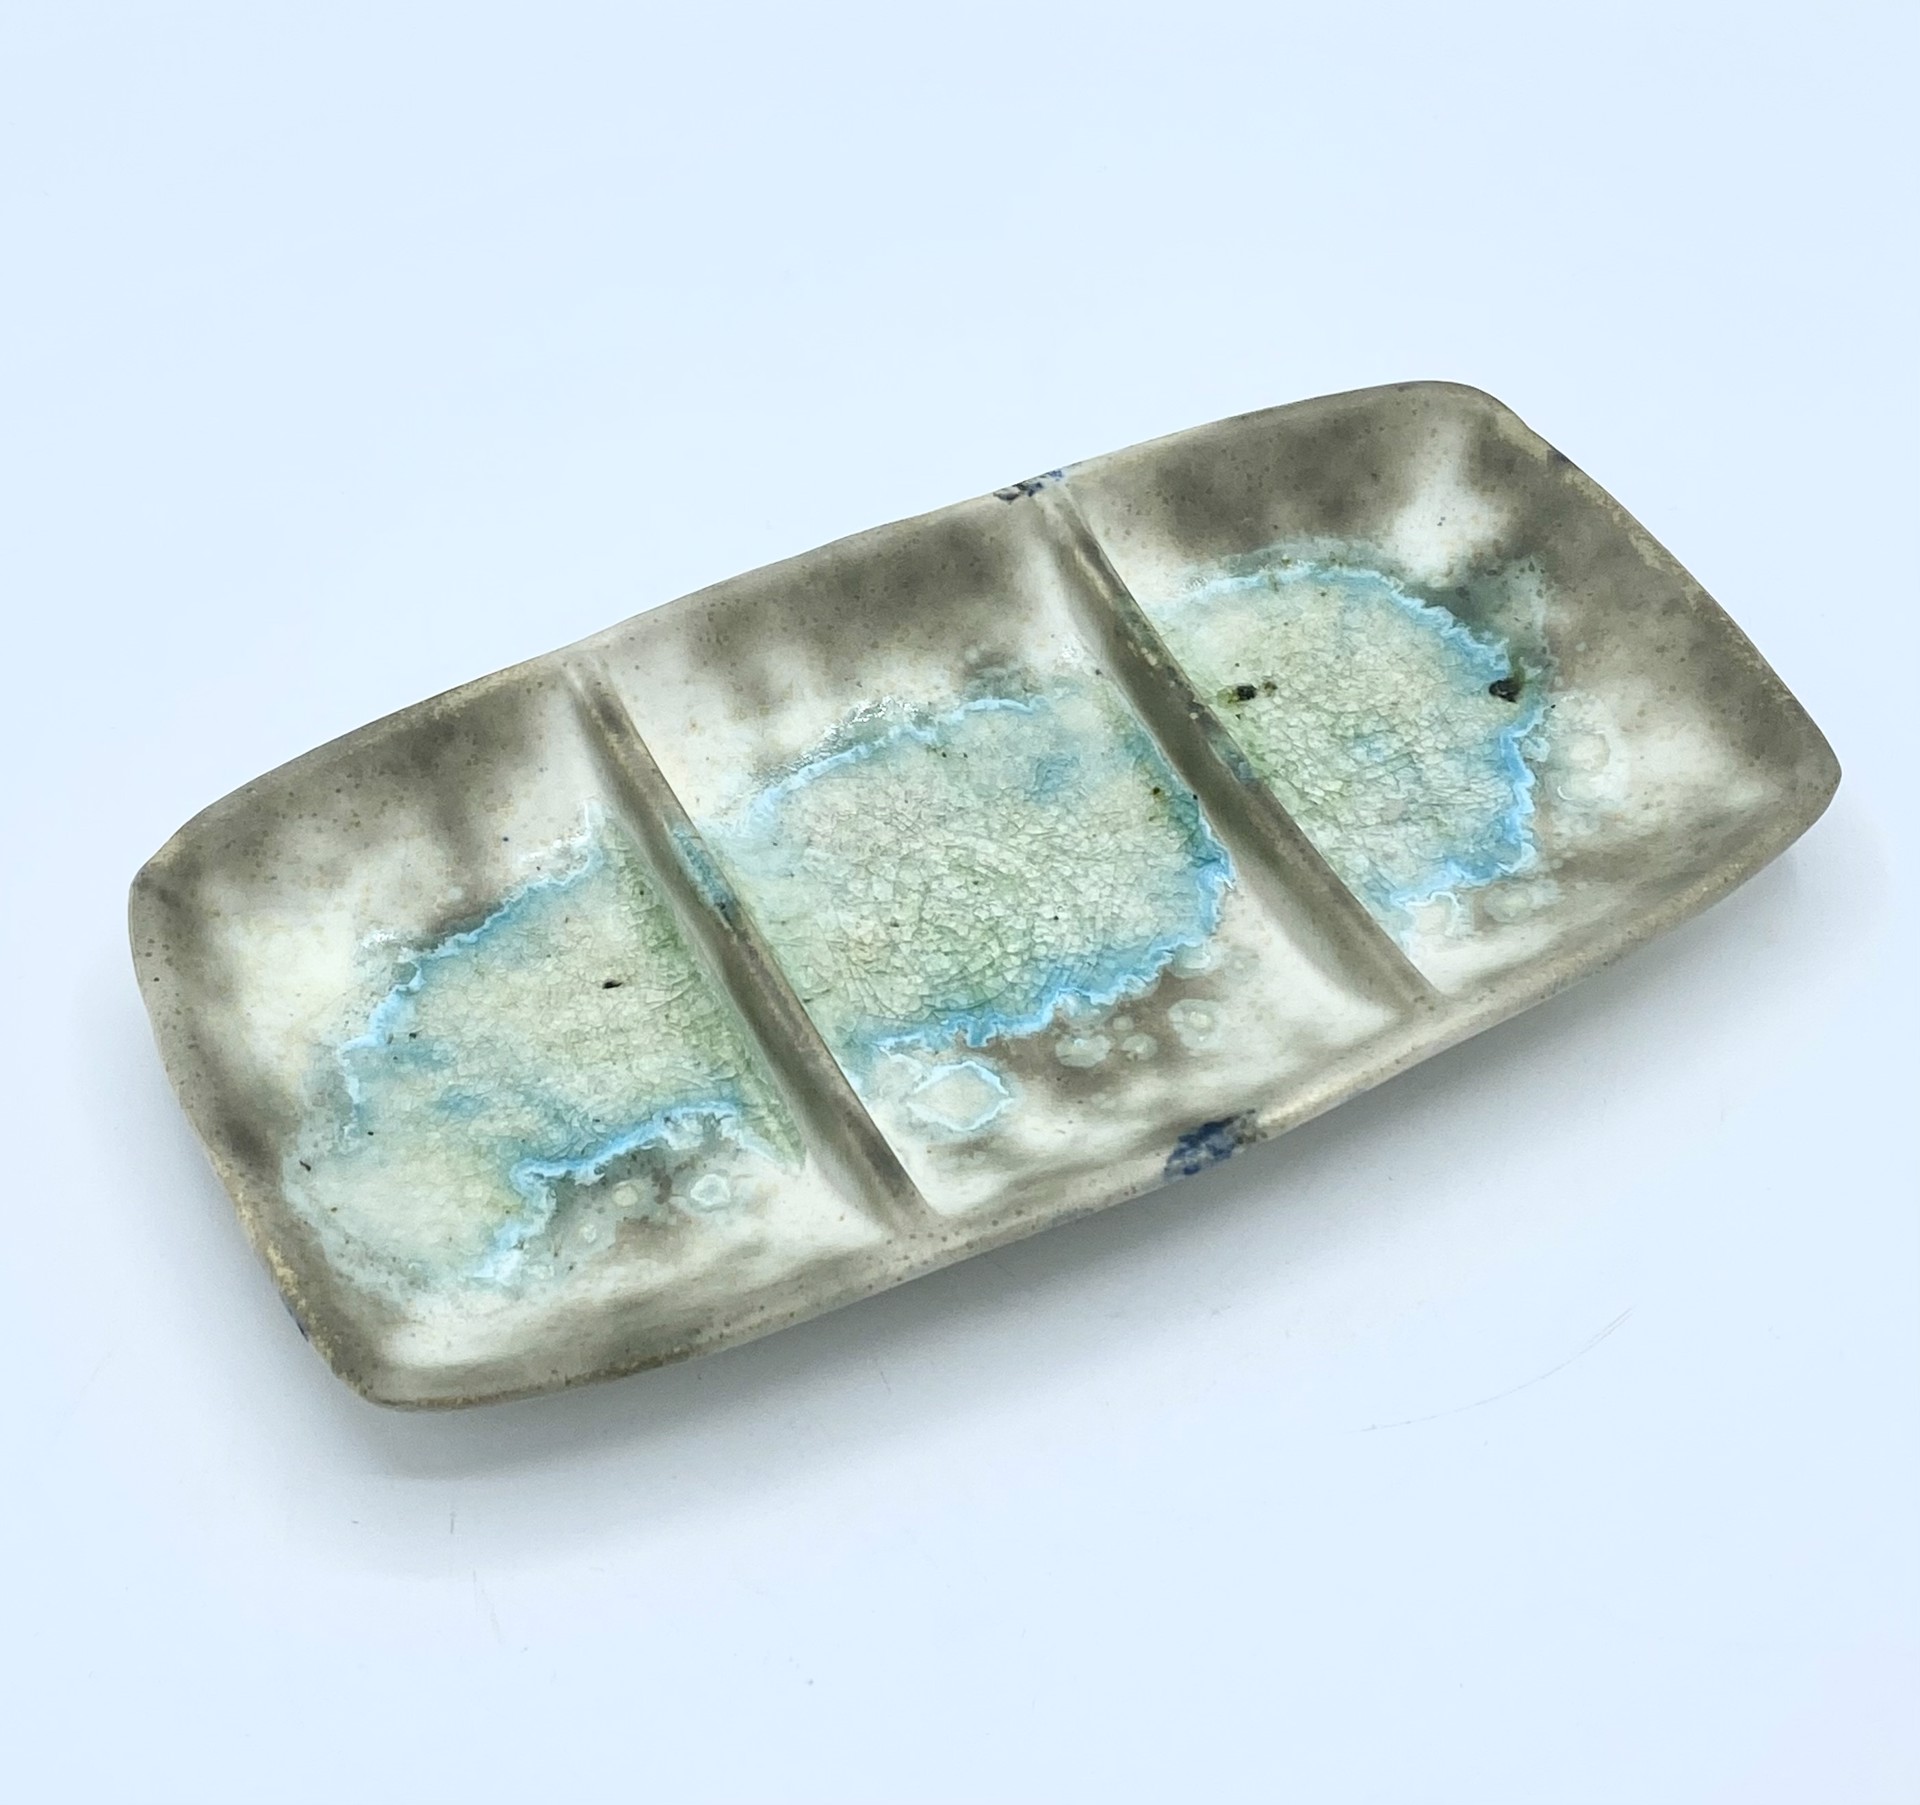 Divided Tray 1 by Satterfield Pottery